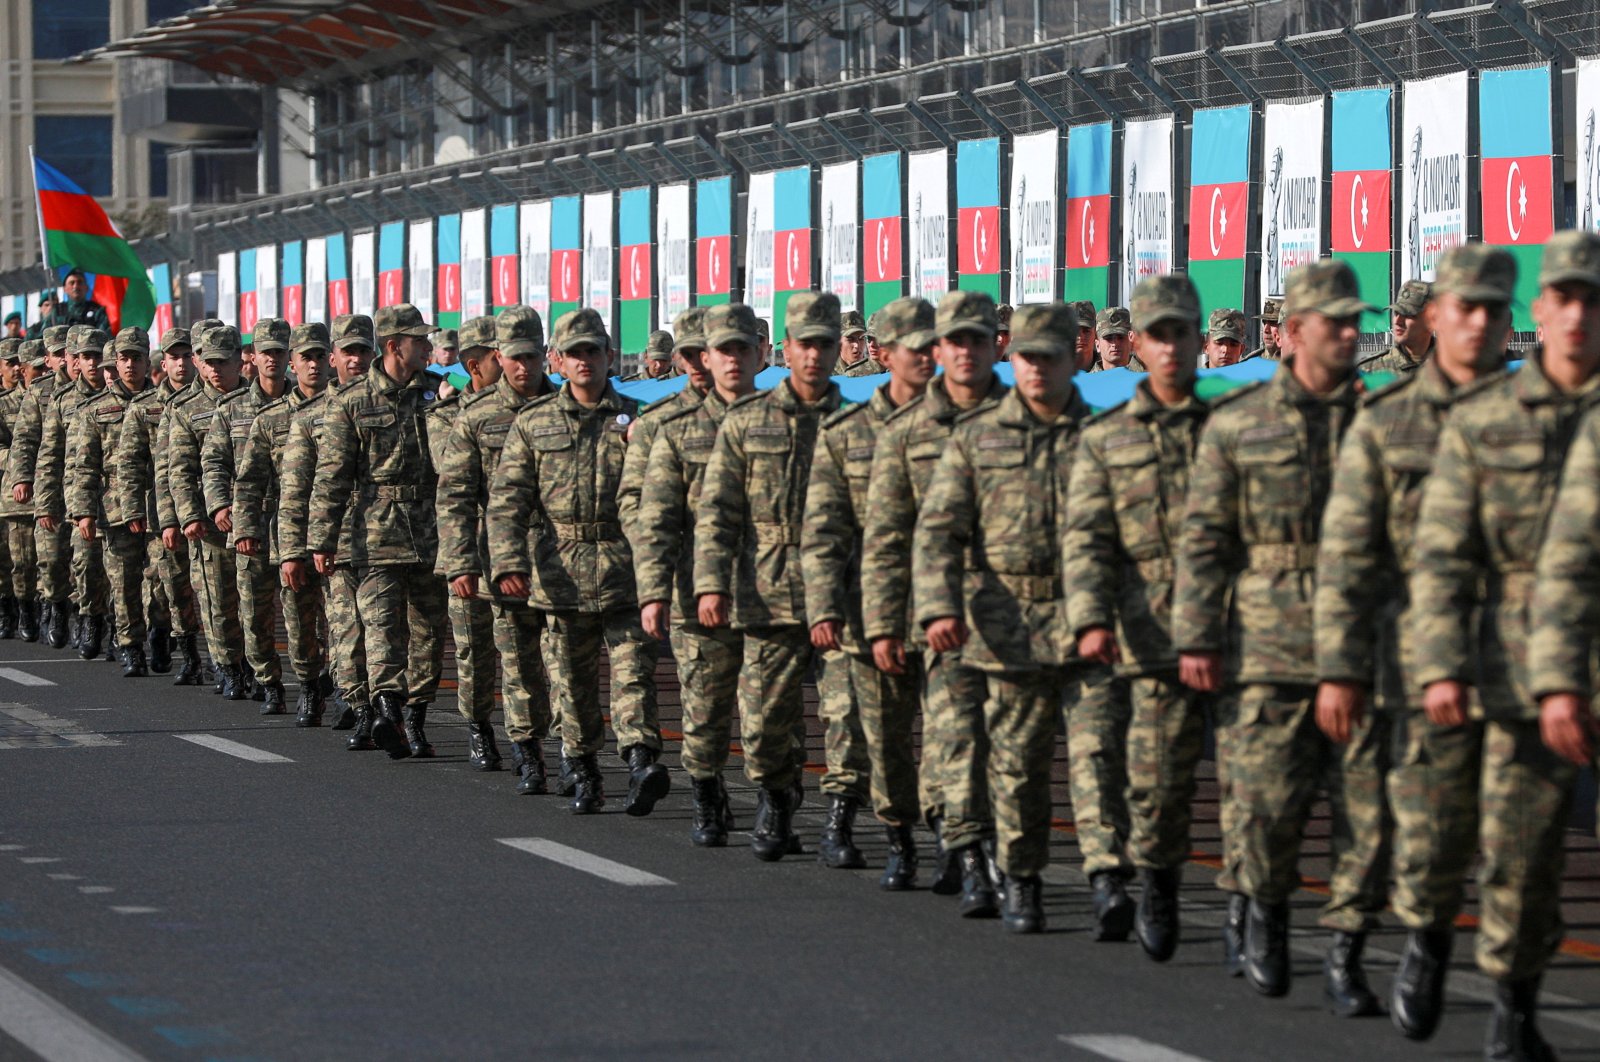 Azerbaijani service members take part in a procession marking the anniversary of the end of the 2020 military conflict over Nagorno-Karabakh in Baku, Azerbaijan, Nov. 8, 2021. (Reuters Photo)